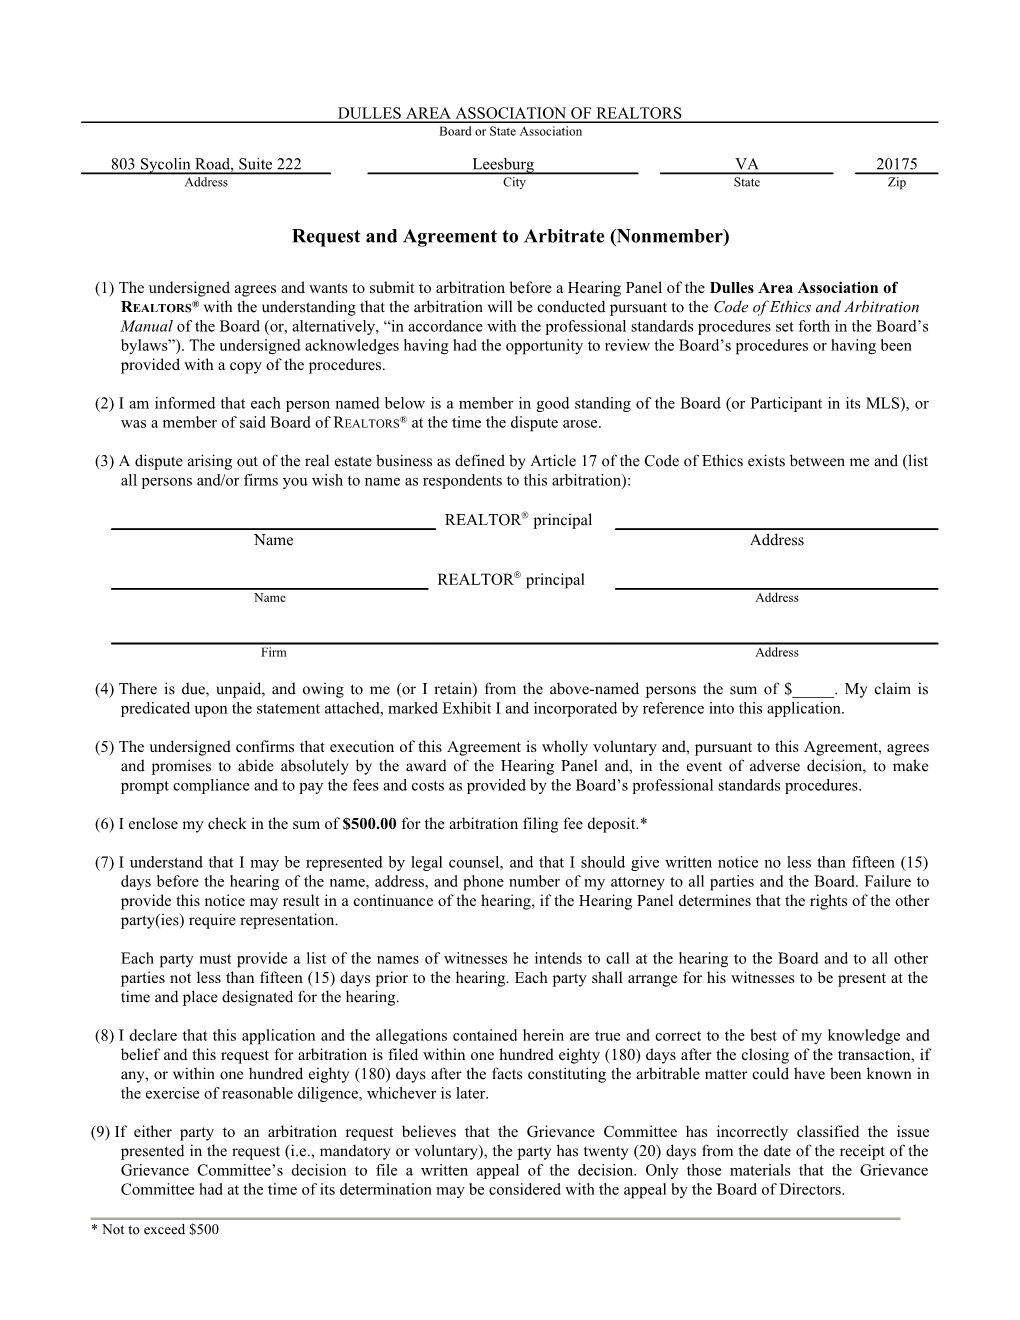 Request and Agreement to Arbitrate (Nonmember)